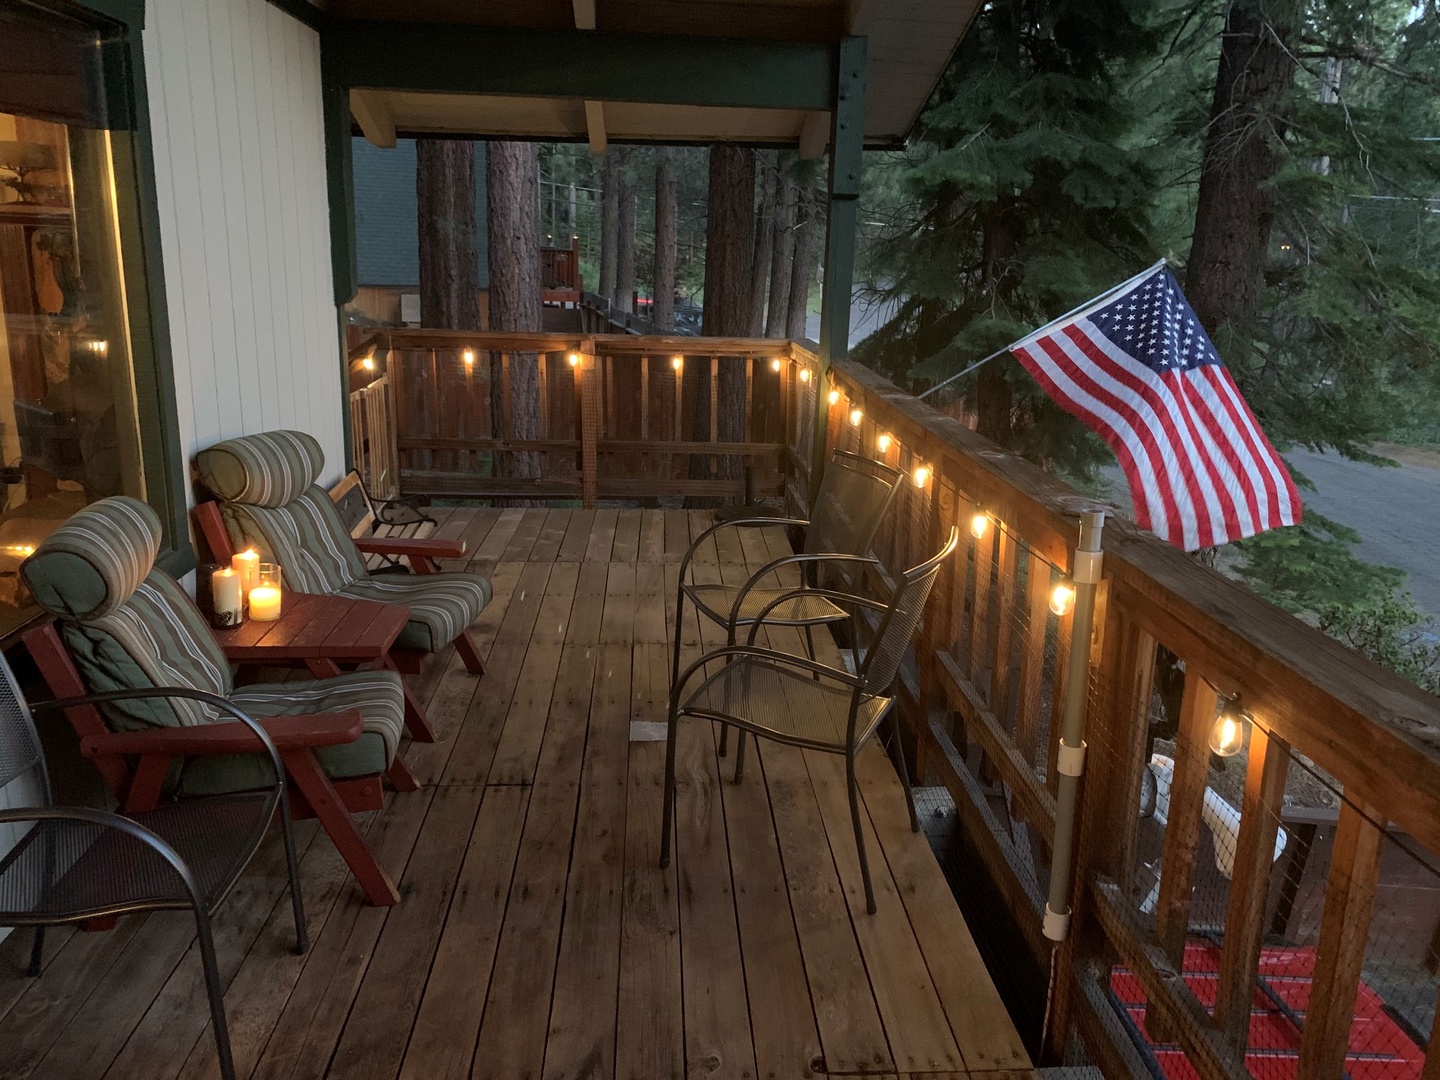 Deck at night with string lights